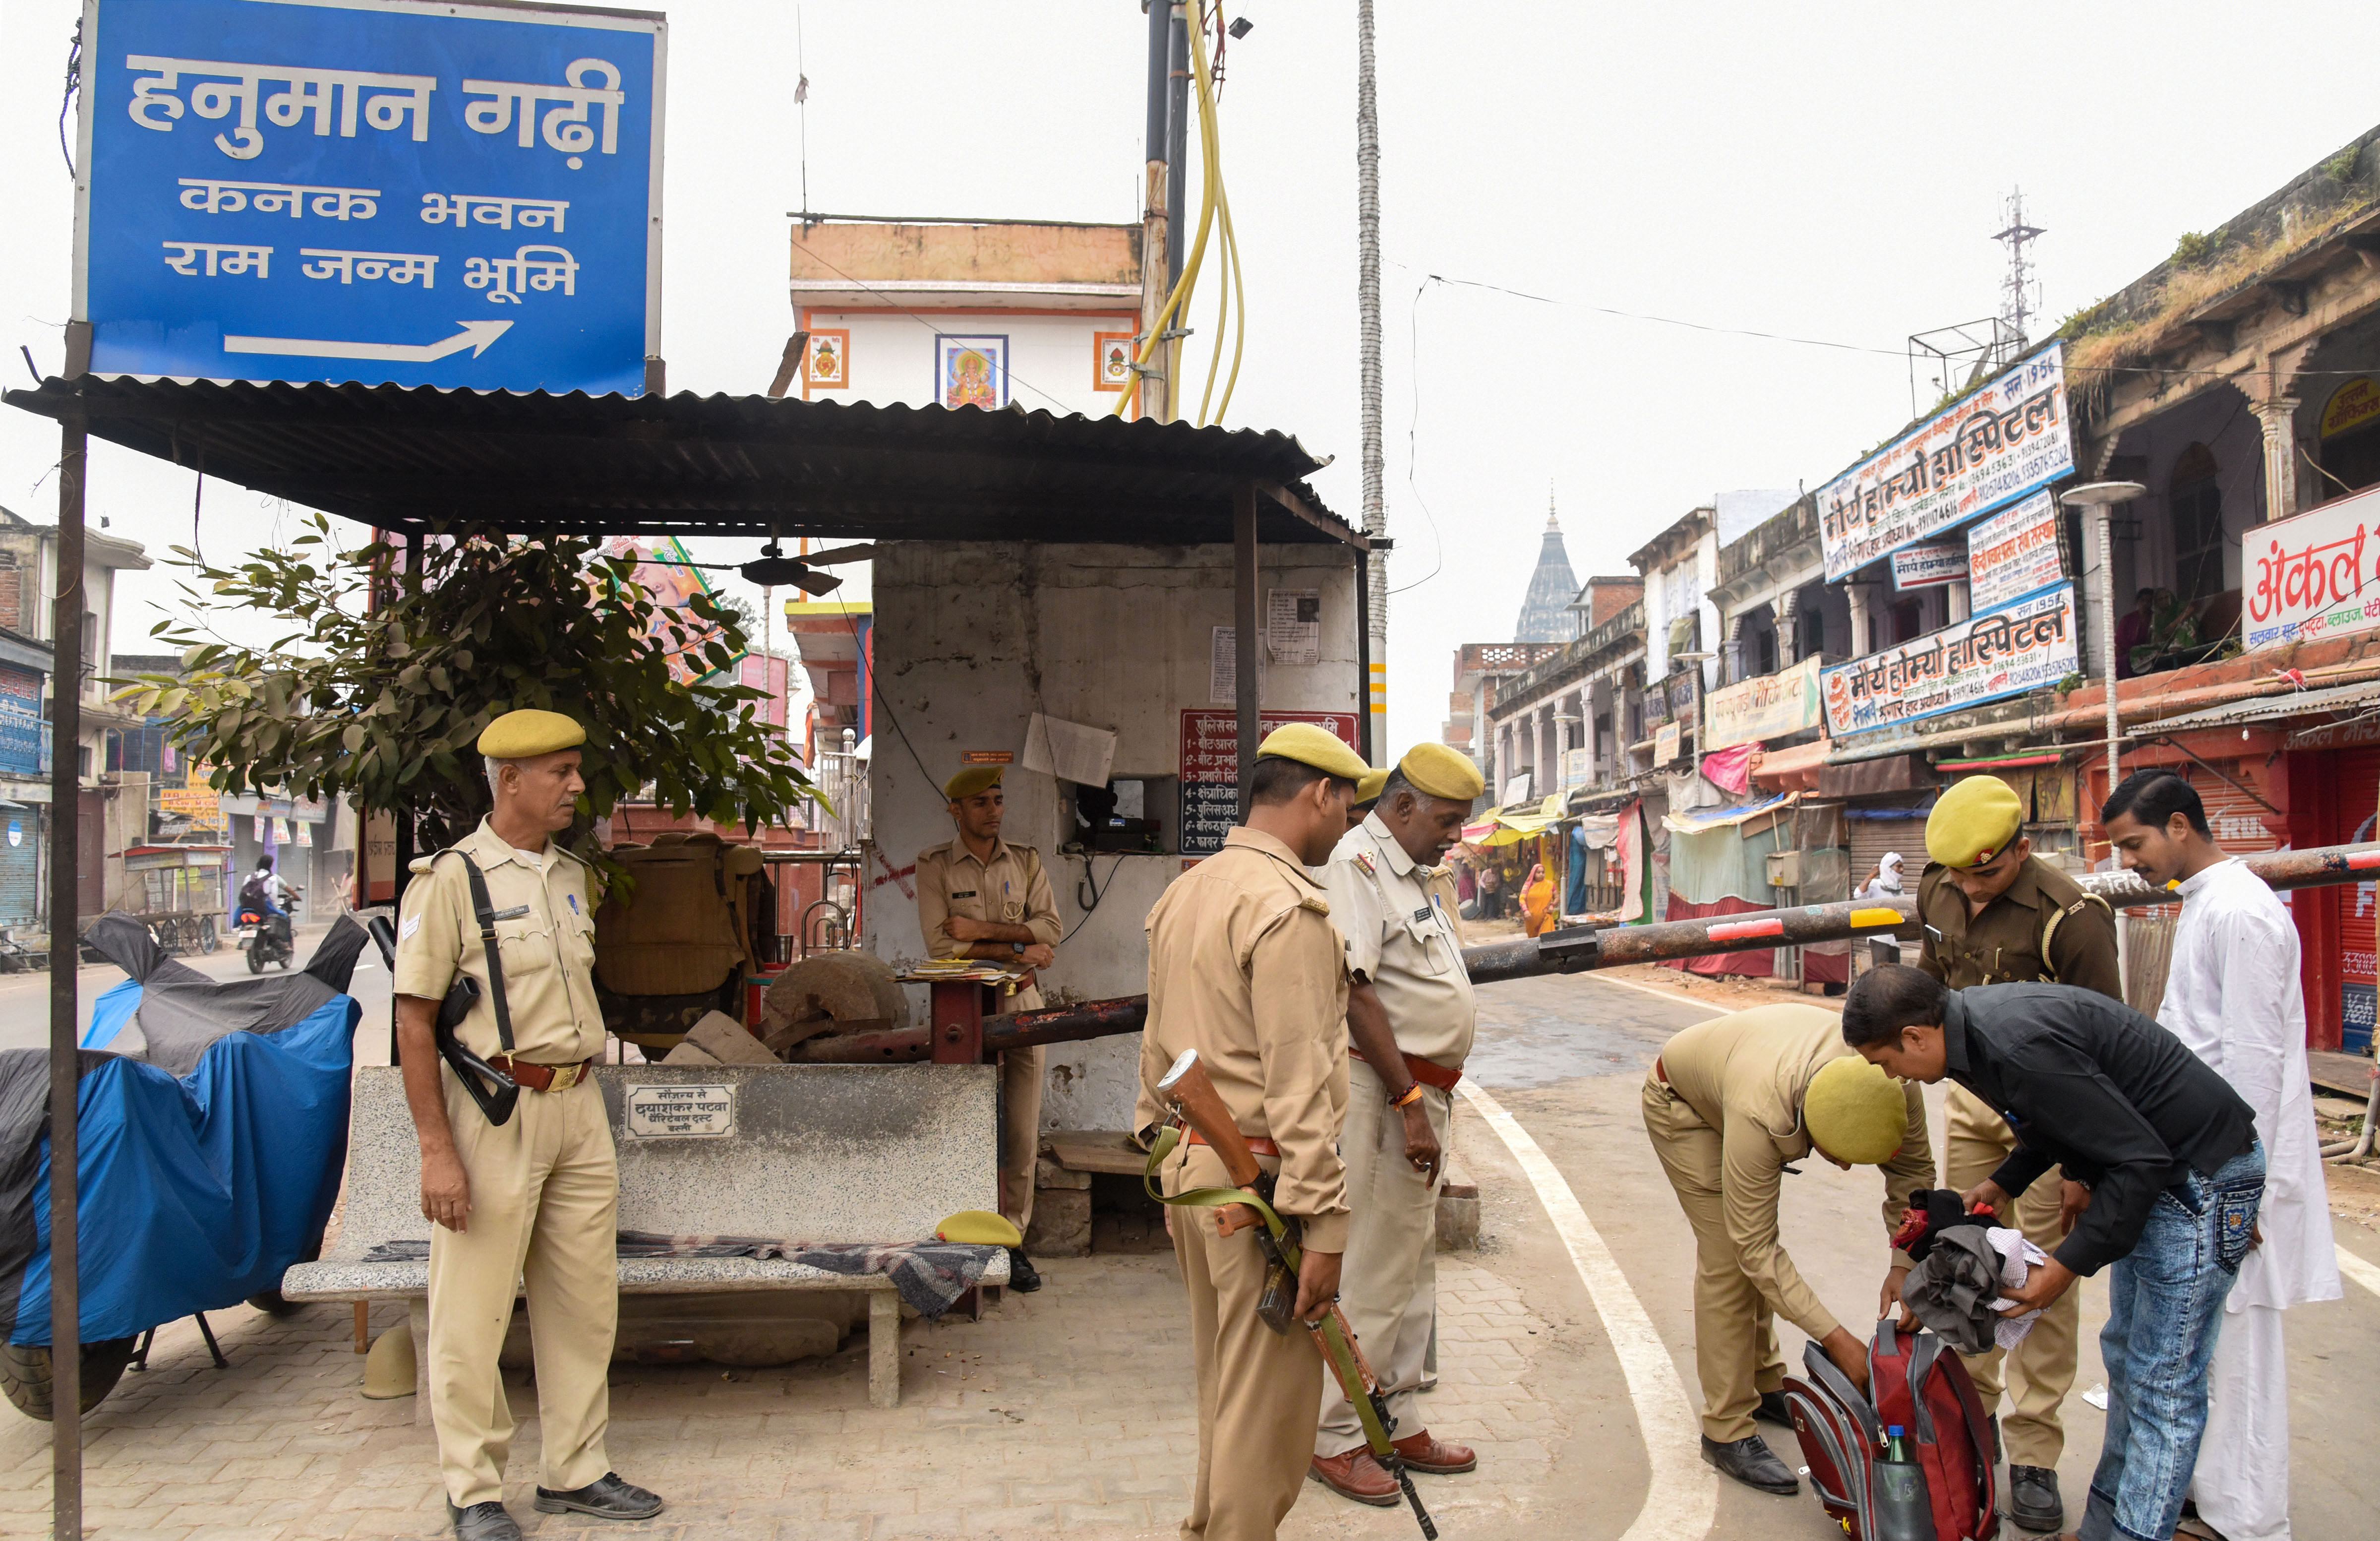 Police personnel conduct checks at a barricade point ahead of 'Deepotsav' festival, in Ayodhya - PTI